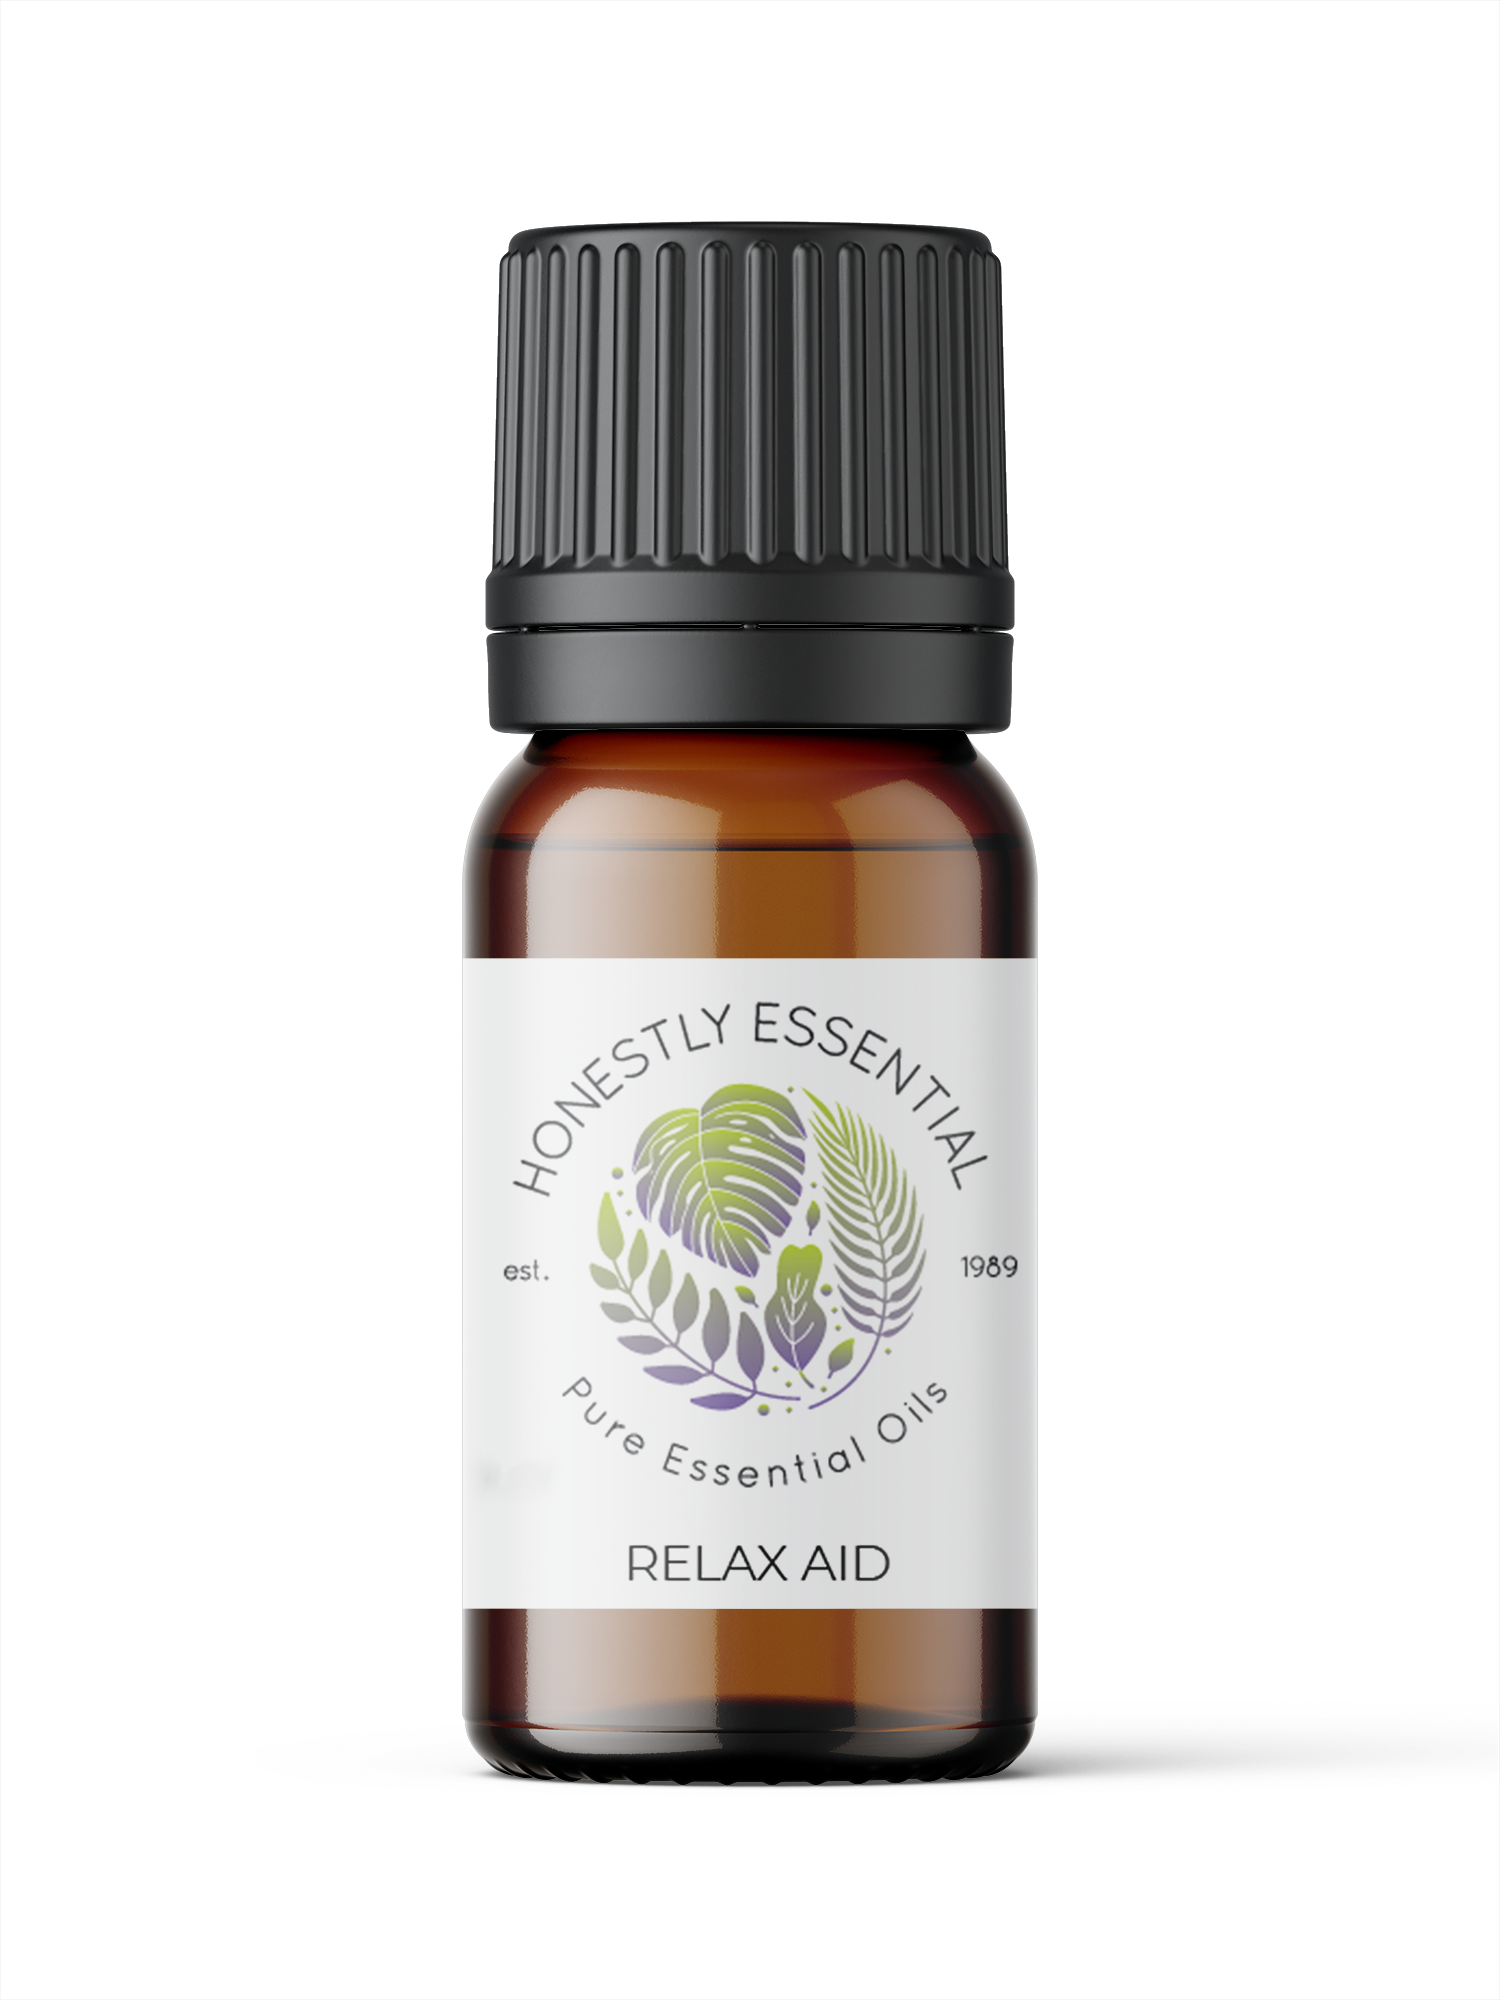 Relax Aid - Synergistic Blends | Honestly Essential Oils synergistic blend